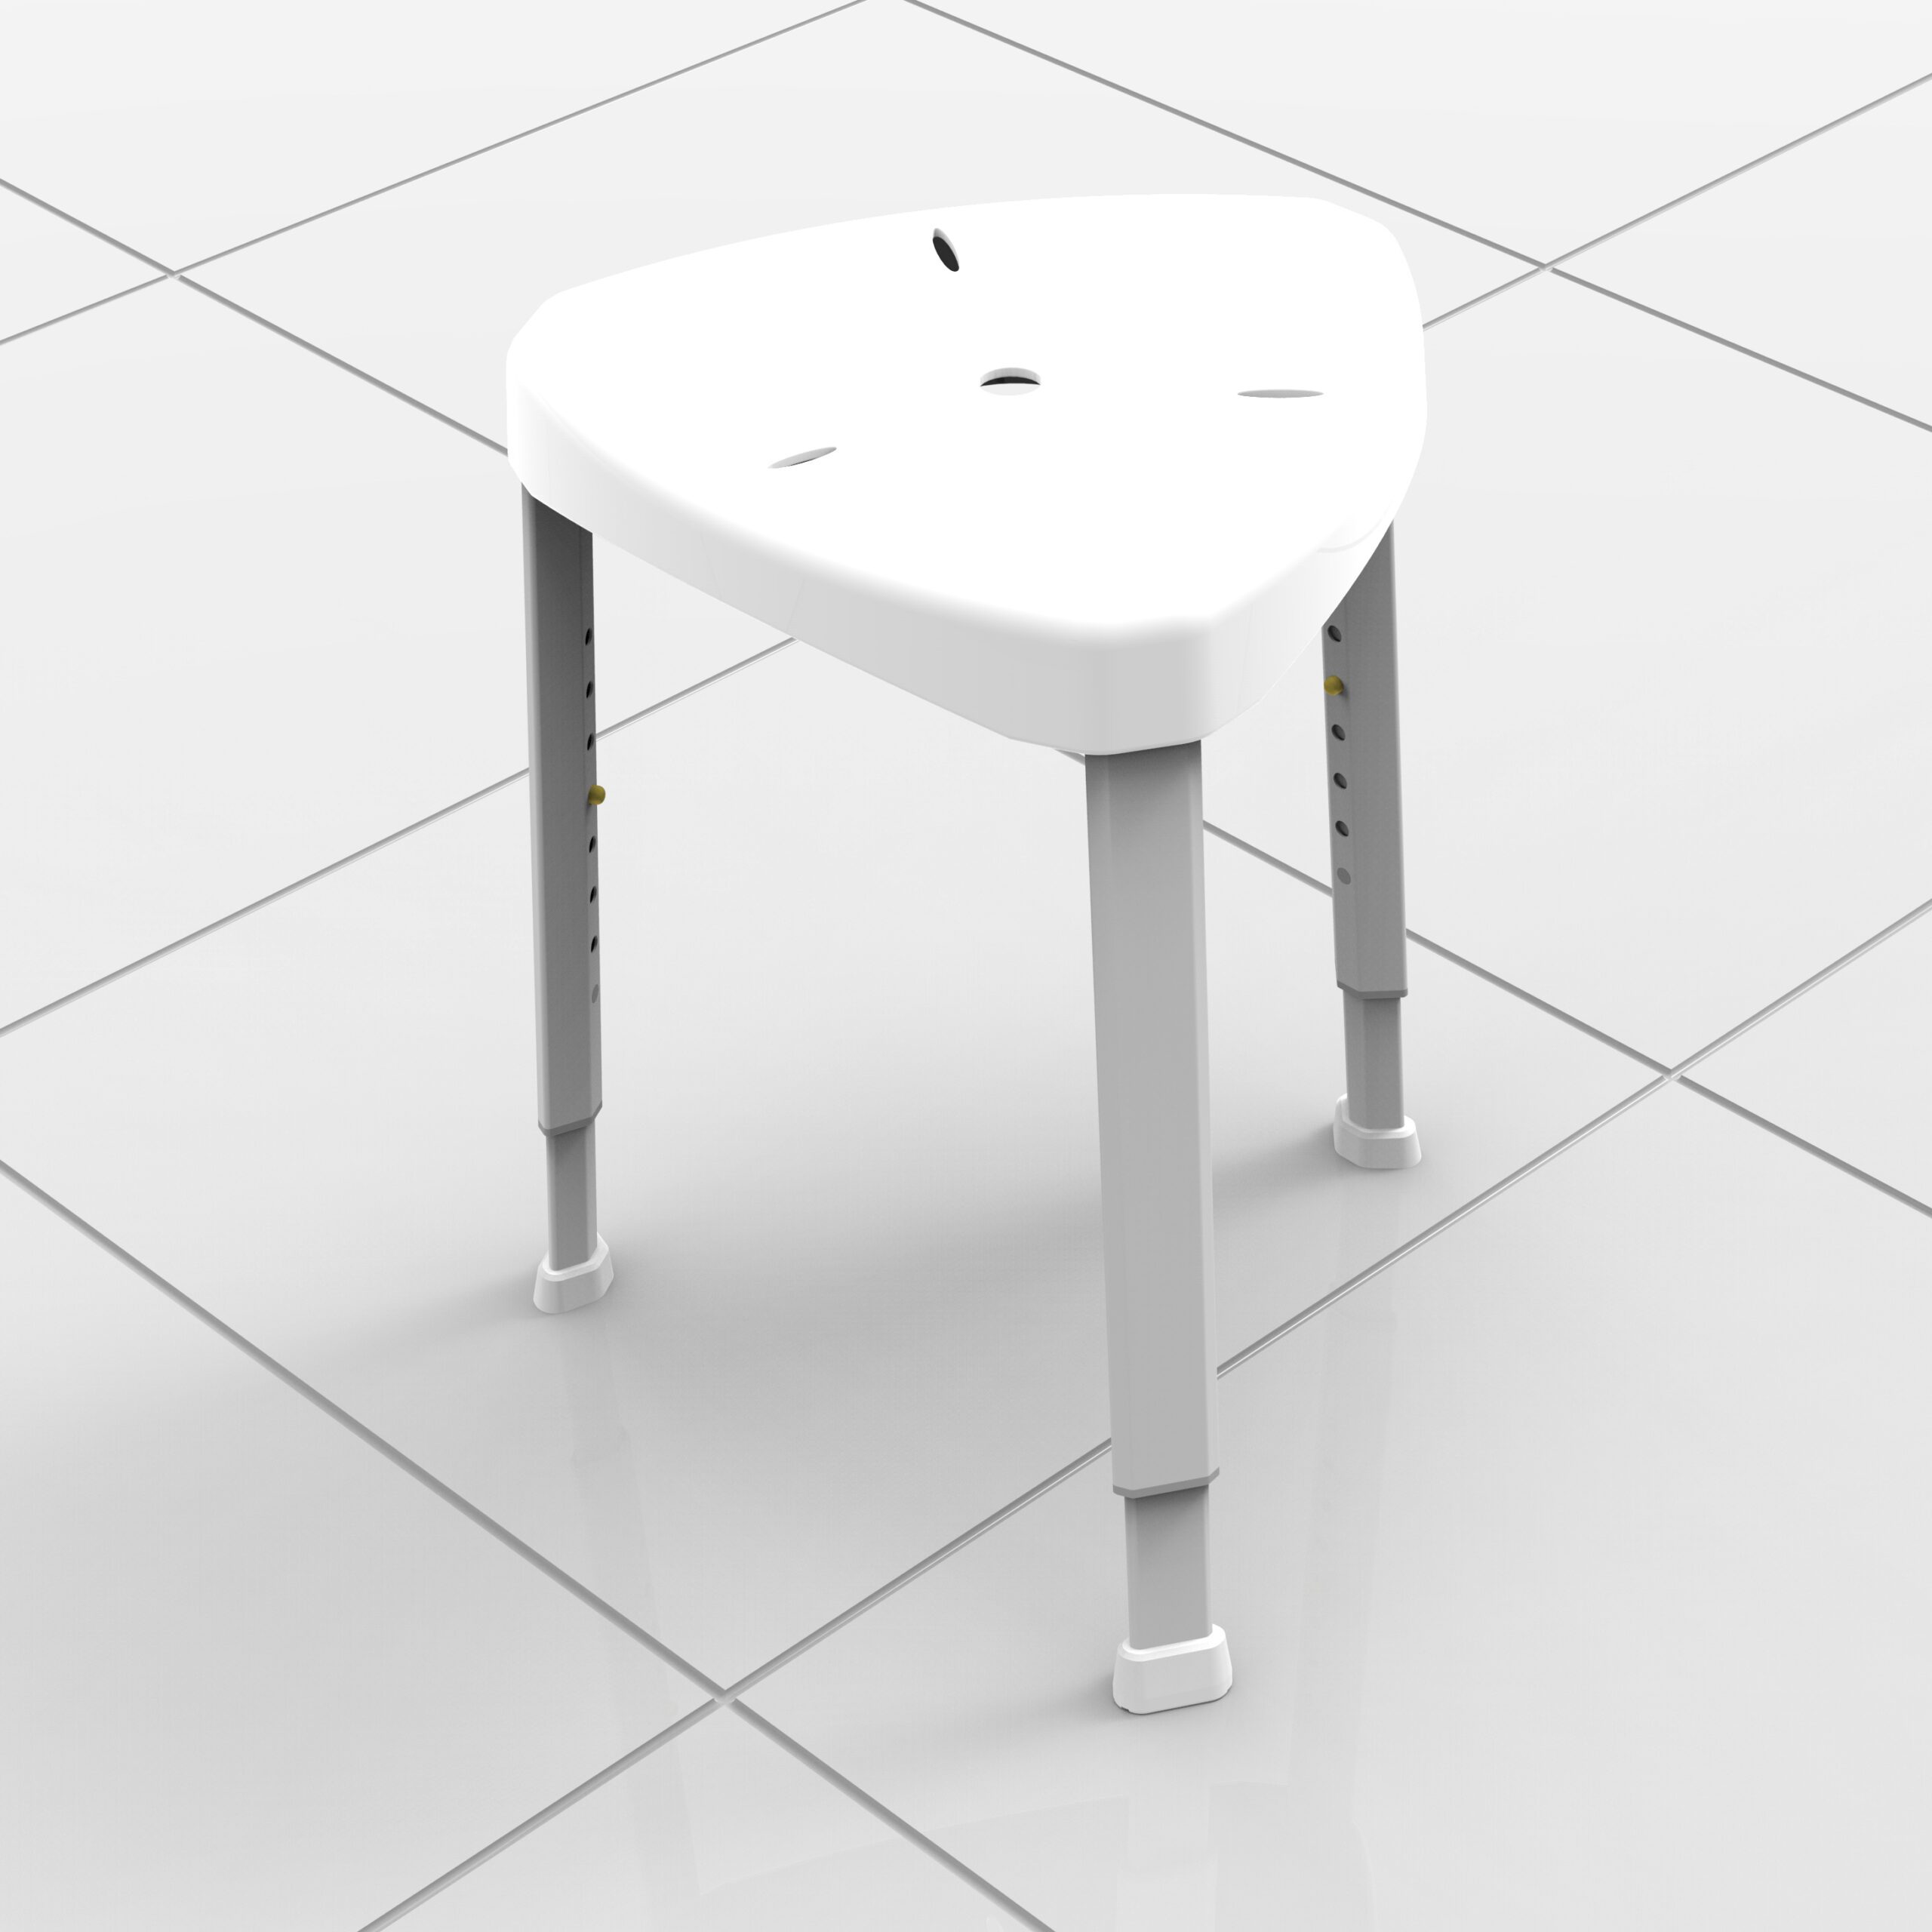 Image showing the Shower Stool in context on a tiled floor